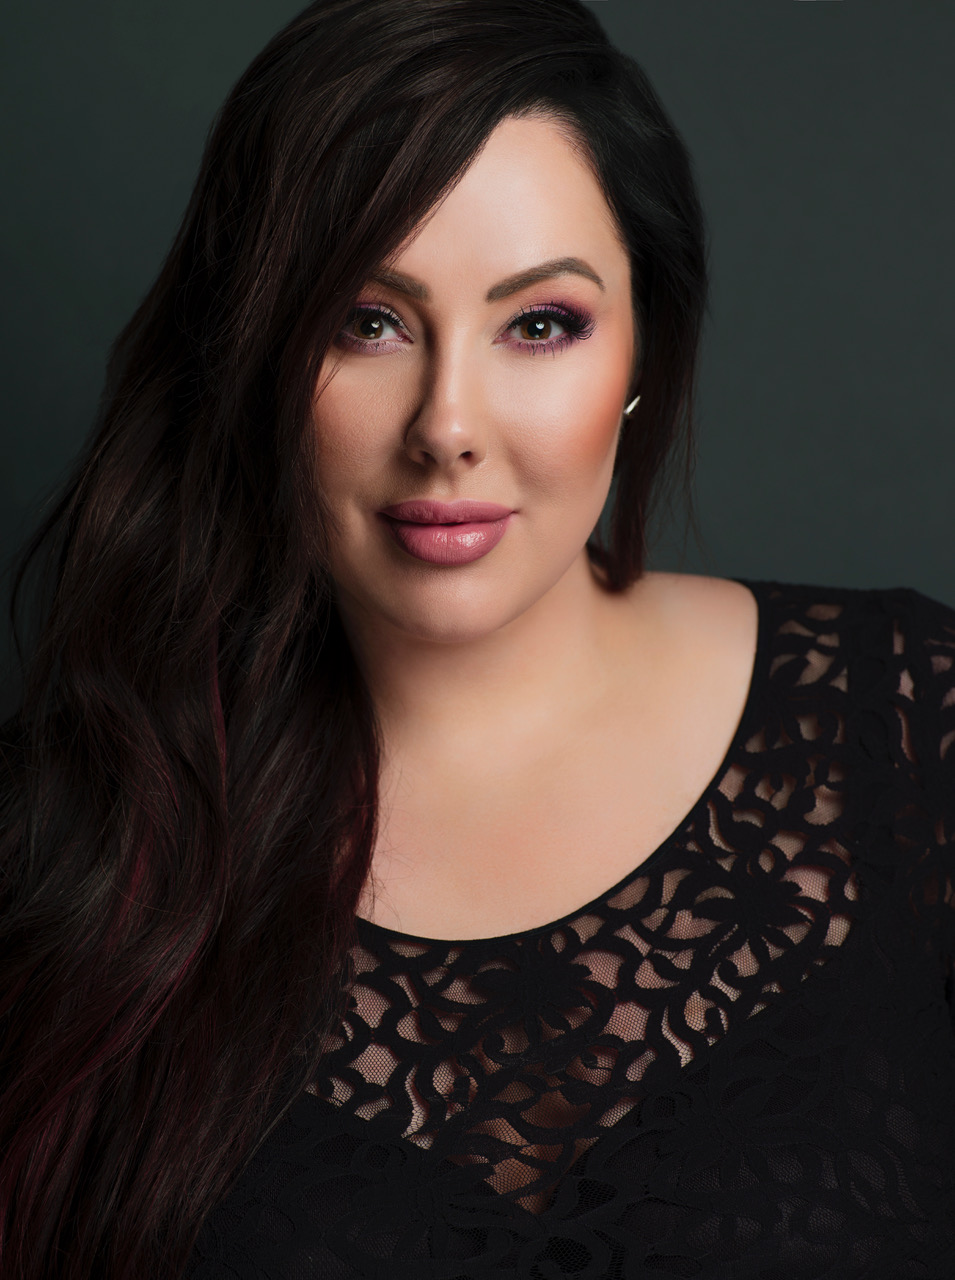 5 Rules For Life: Makeup Geek's Marlena Stell